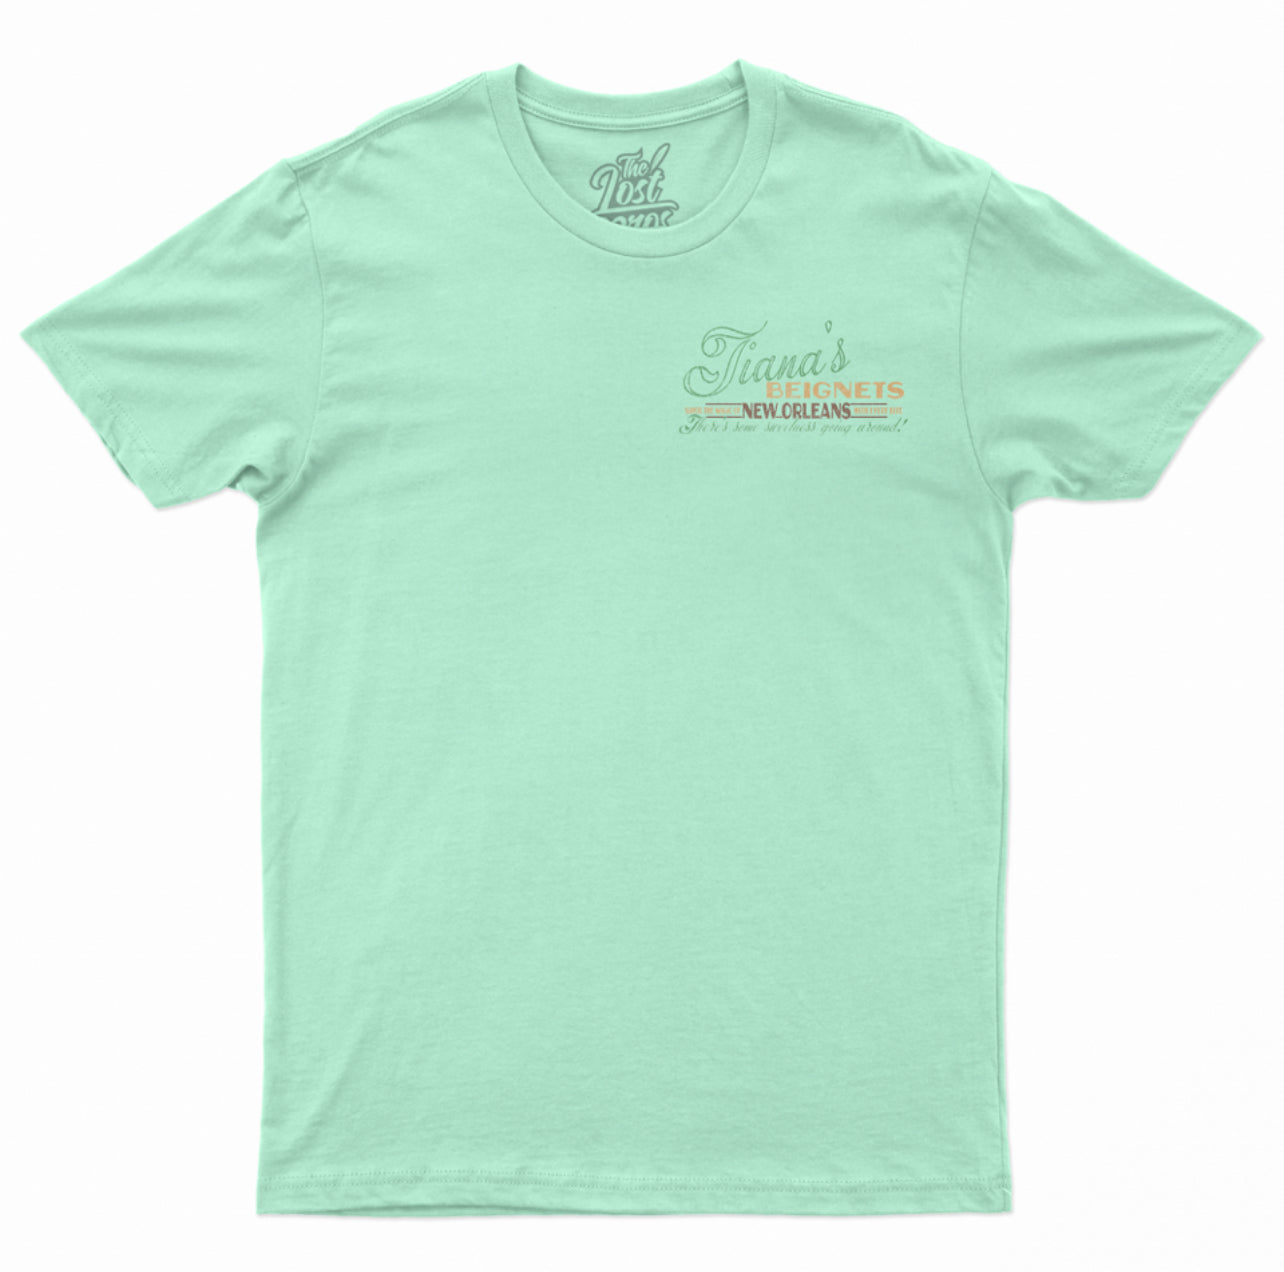 the lost bros tianas beignets front and back tee